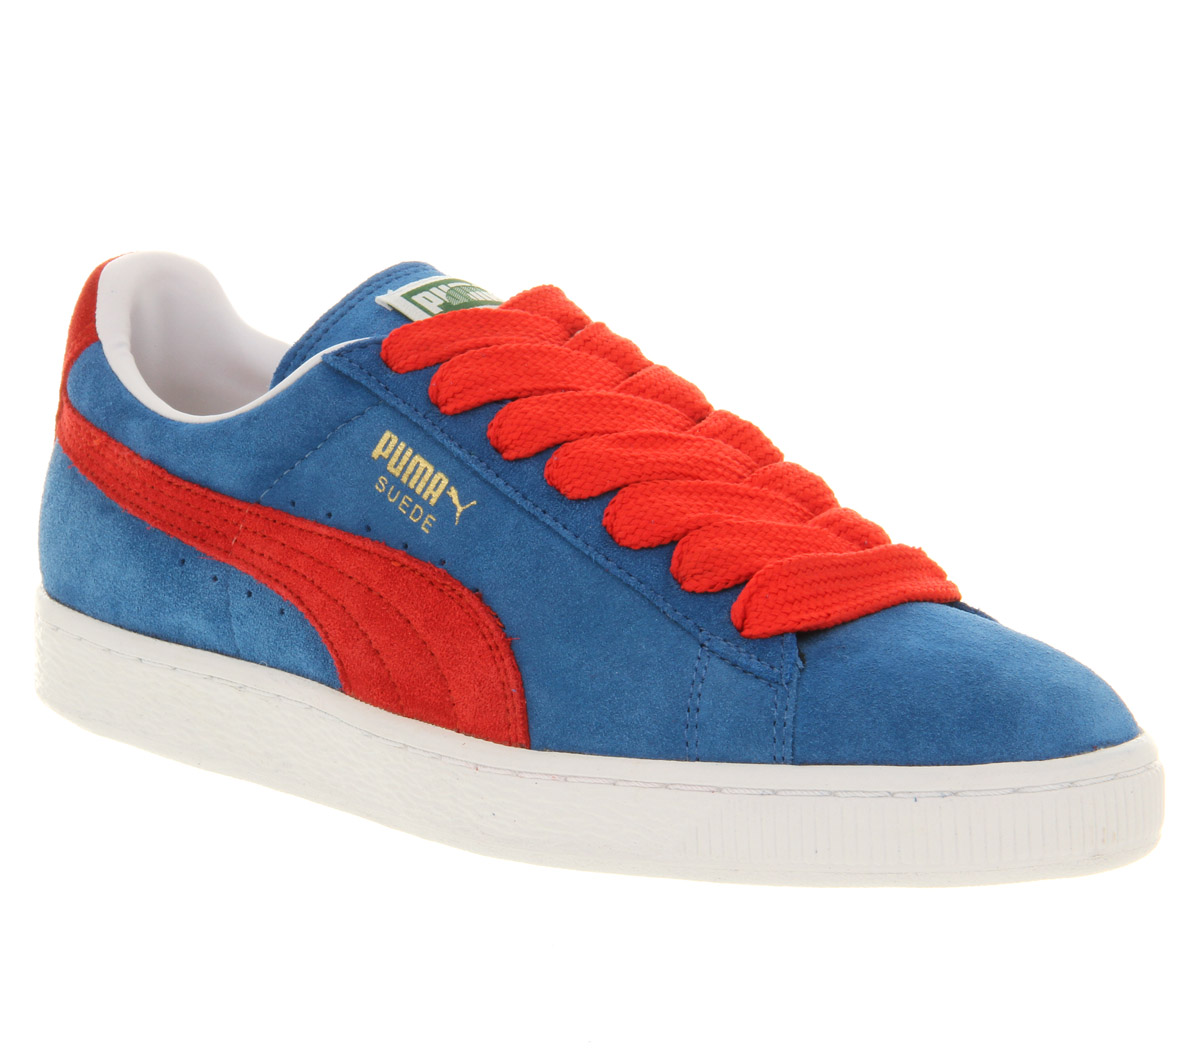 red and blue puma suede Online Shopping for Women, Men, Kids Fashion &  Lifestyle|Free Delivery & Returns -